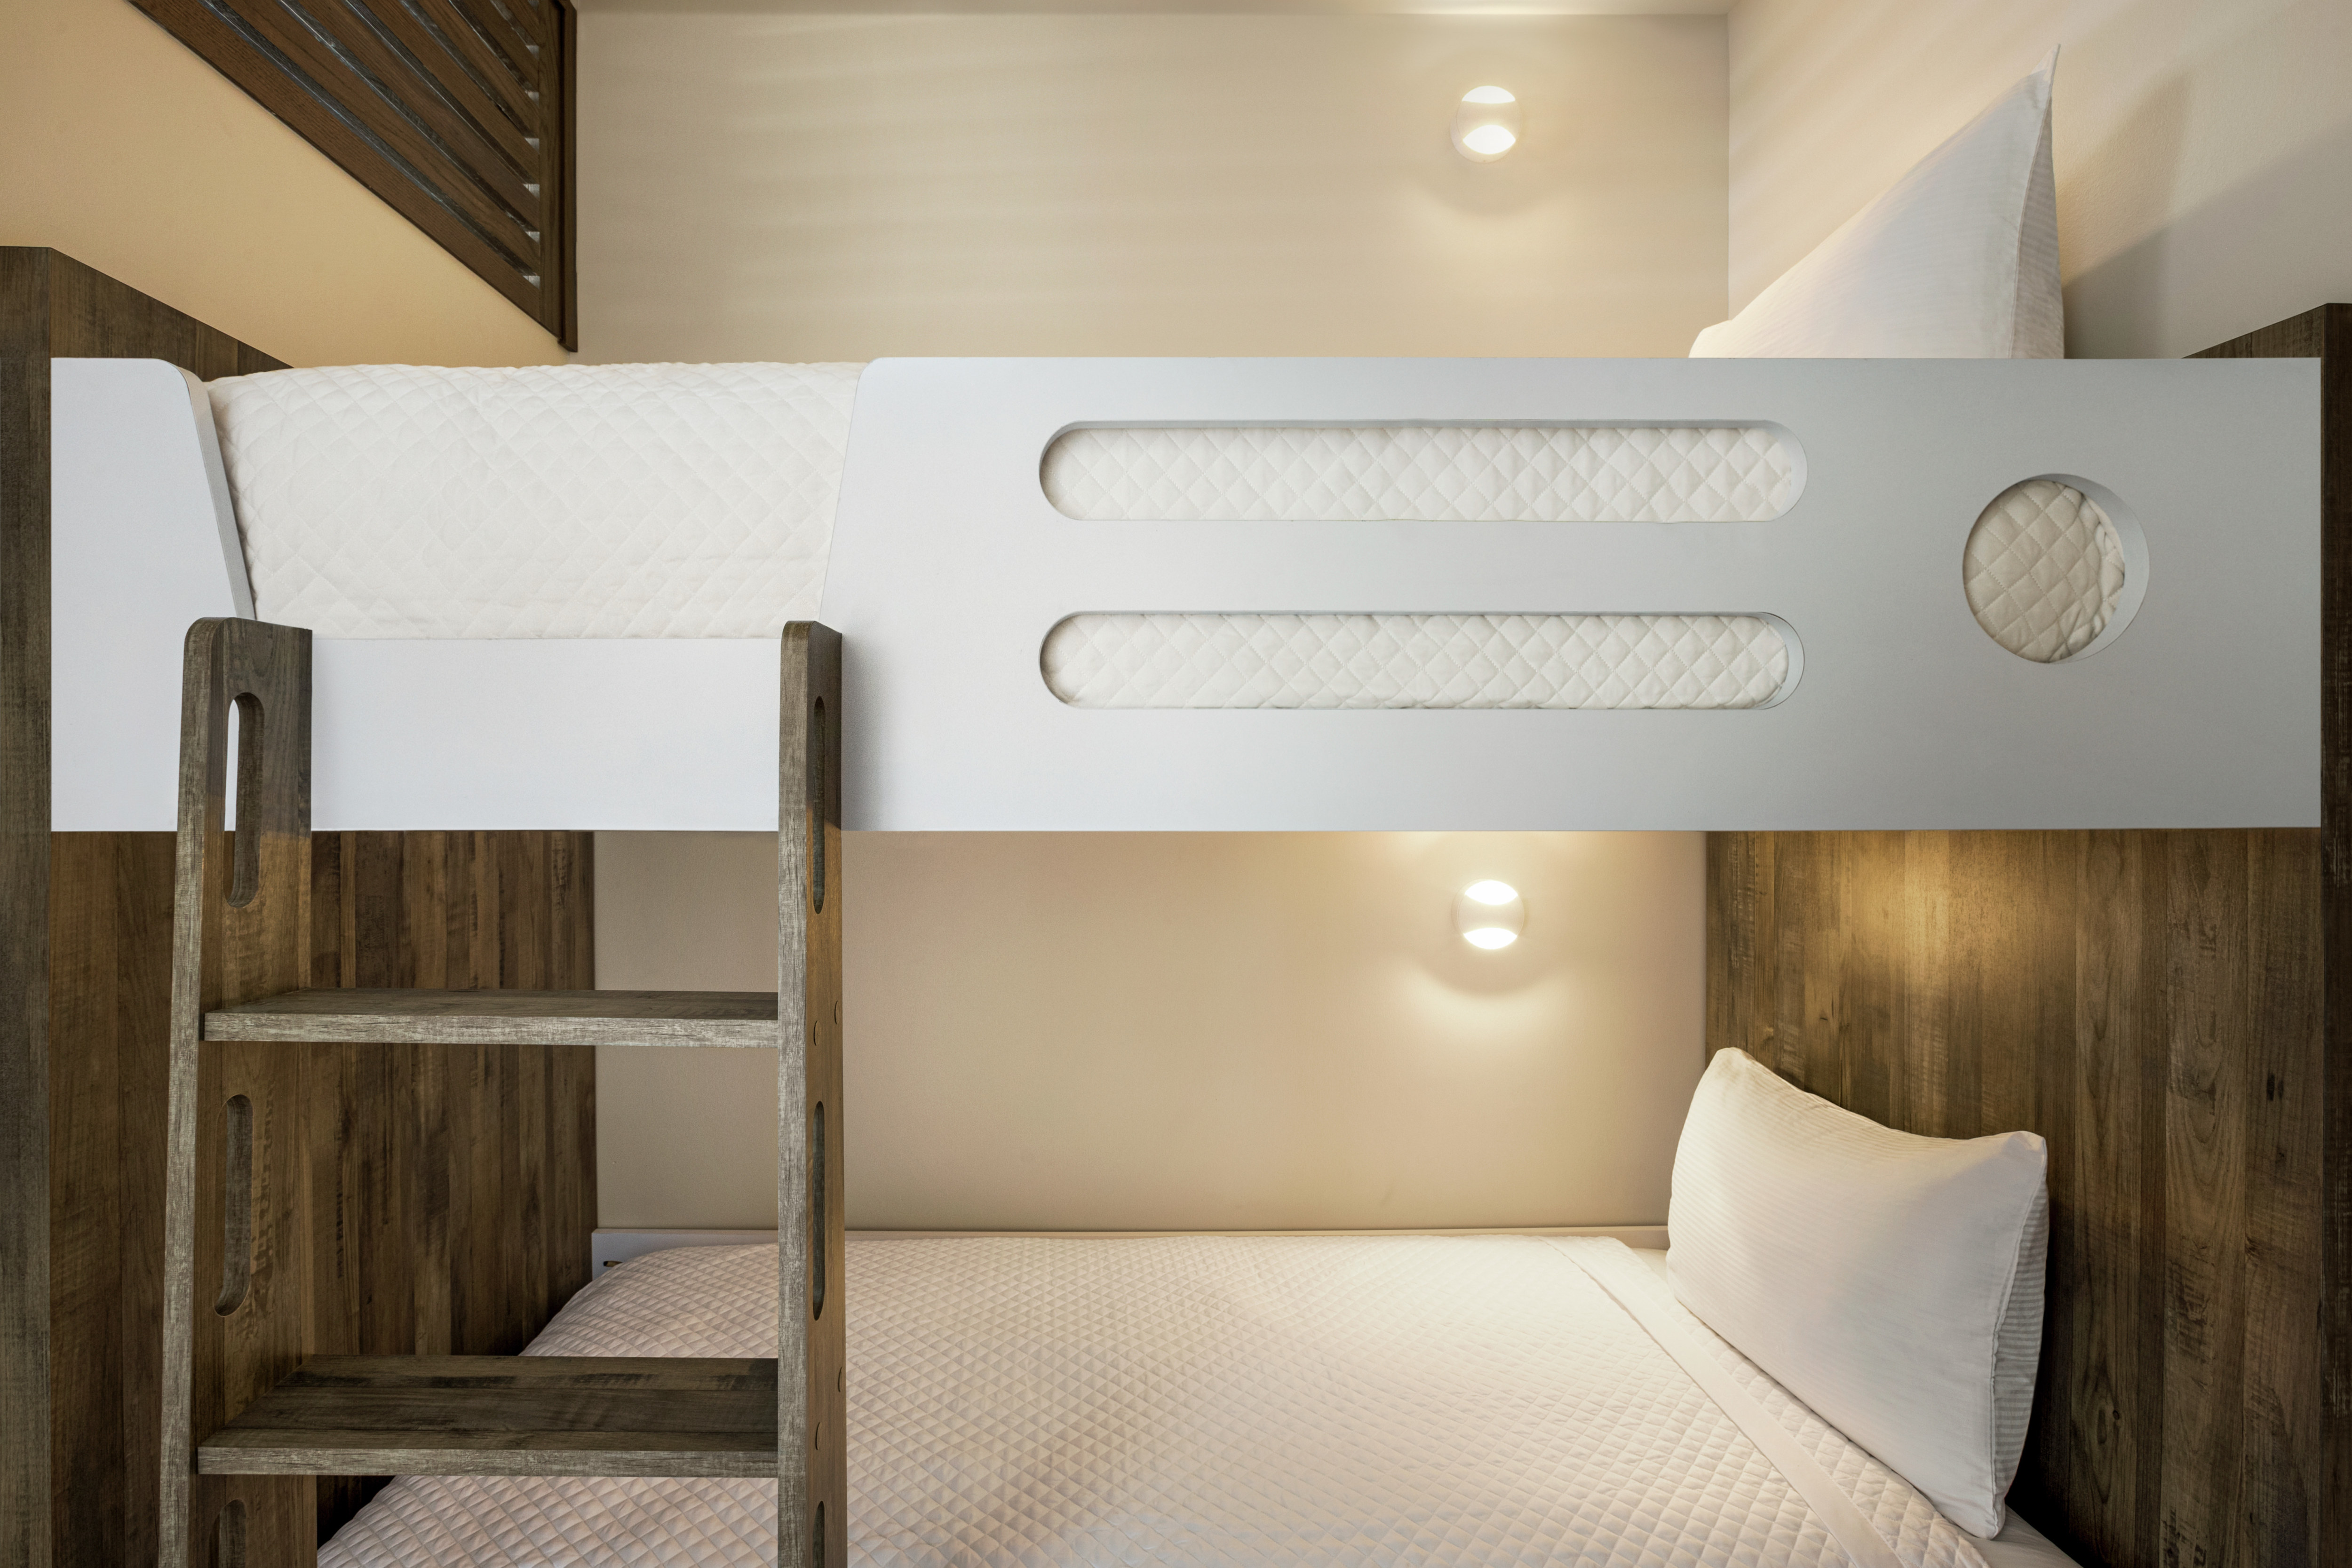 Detail of contemporary bunk beds for guest convenience